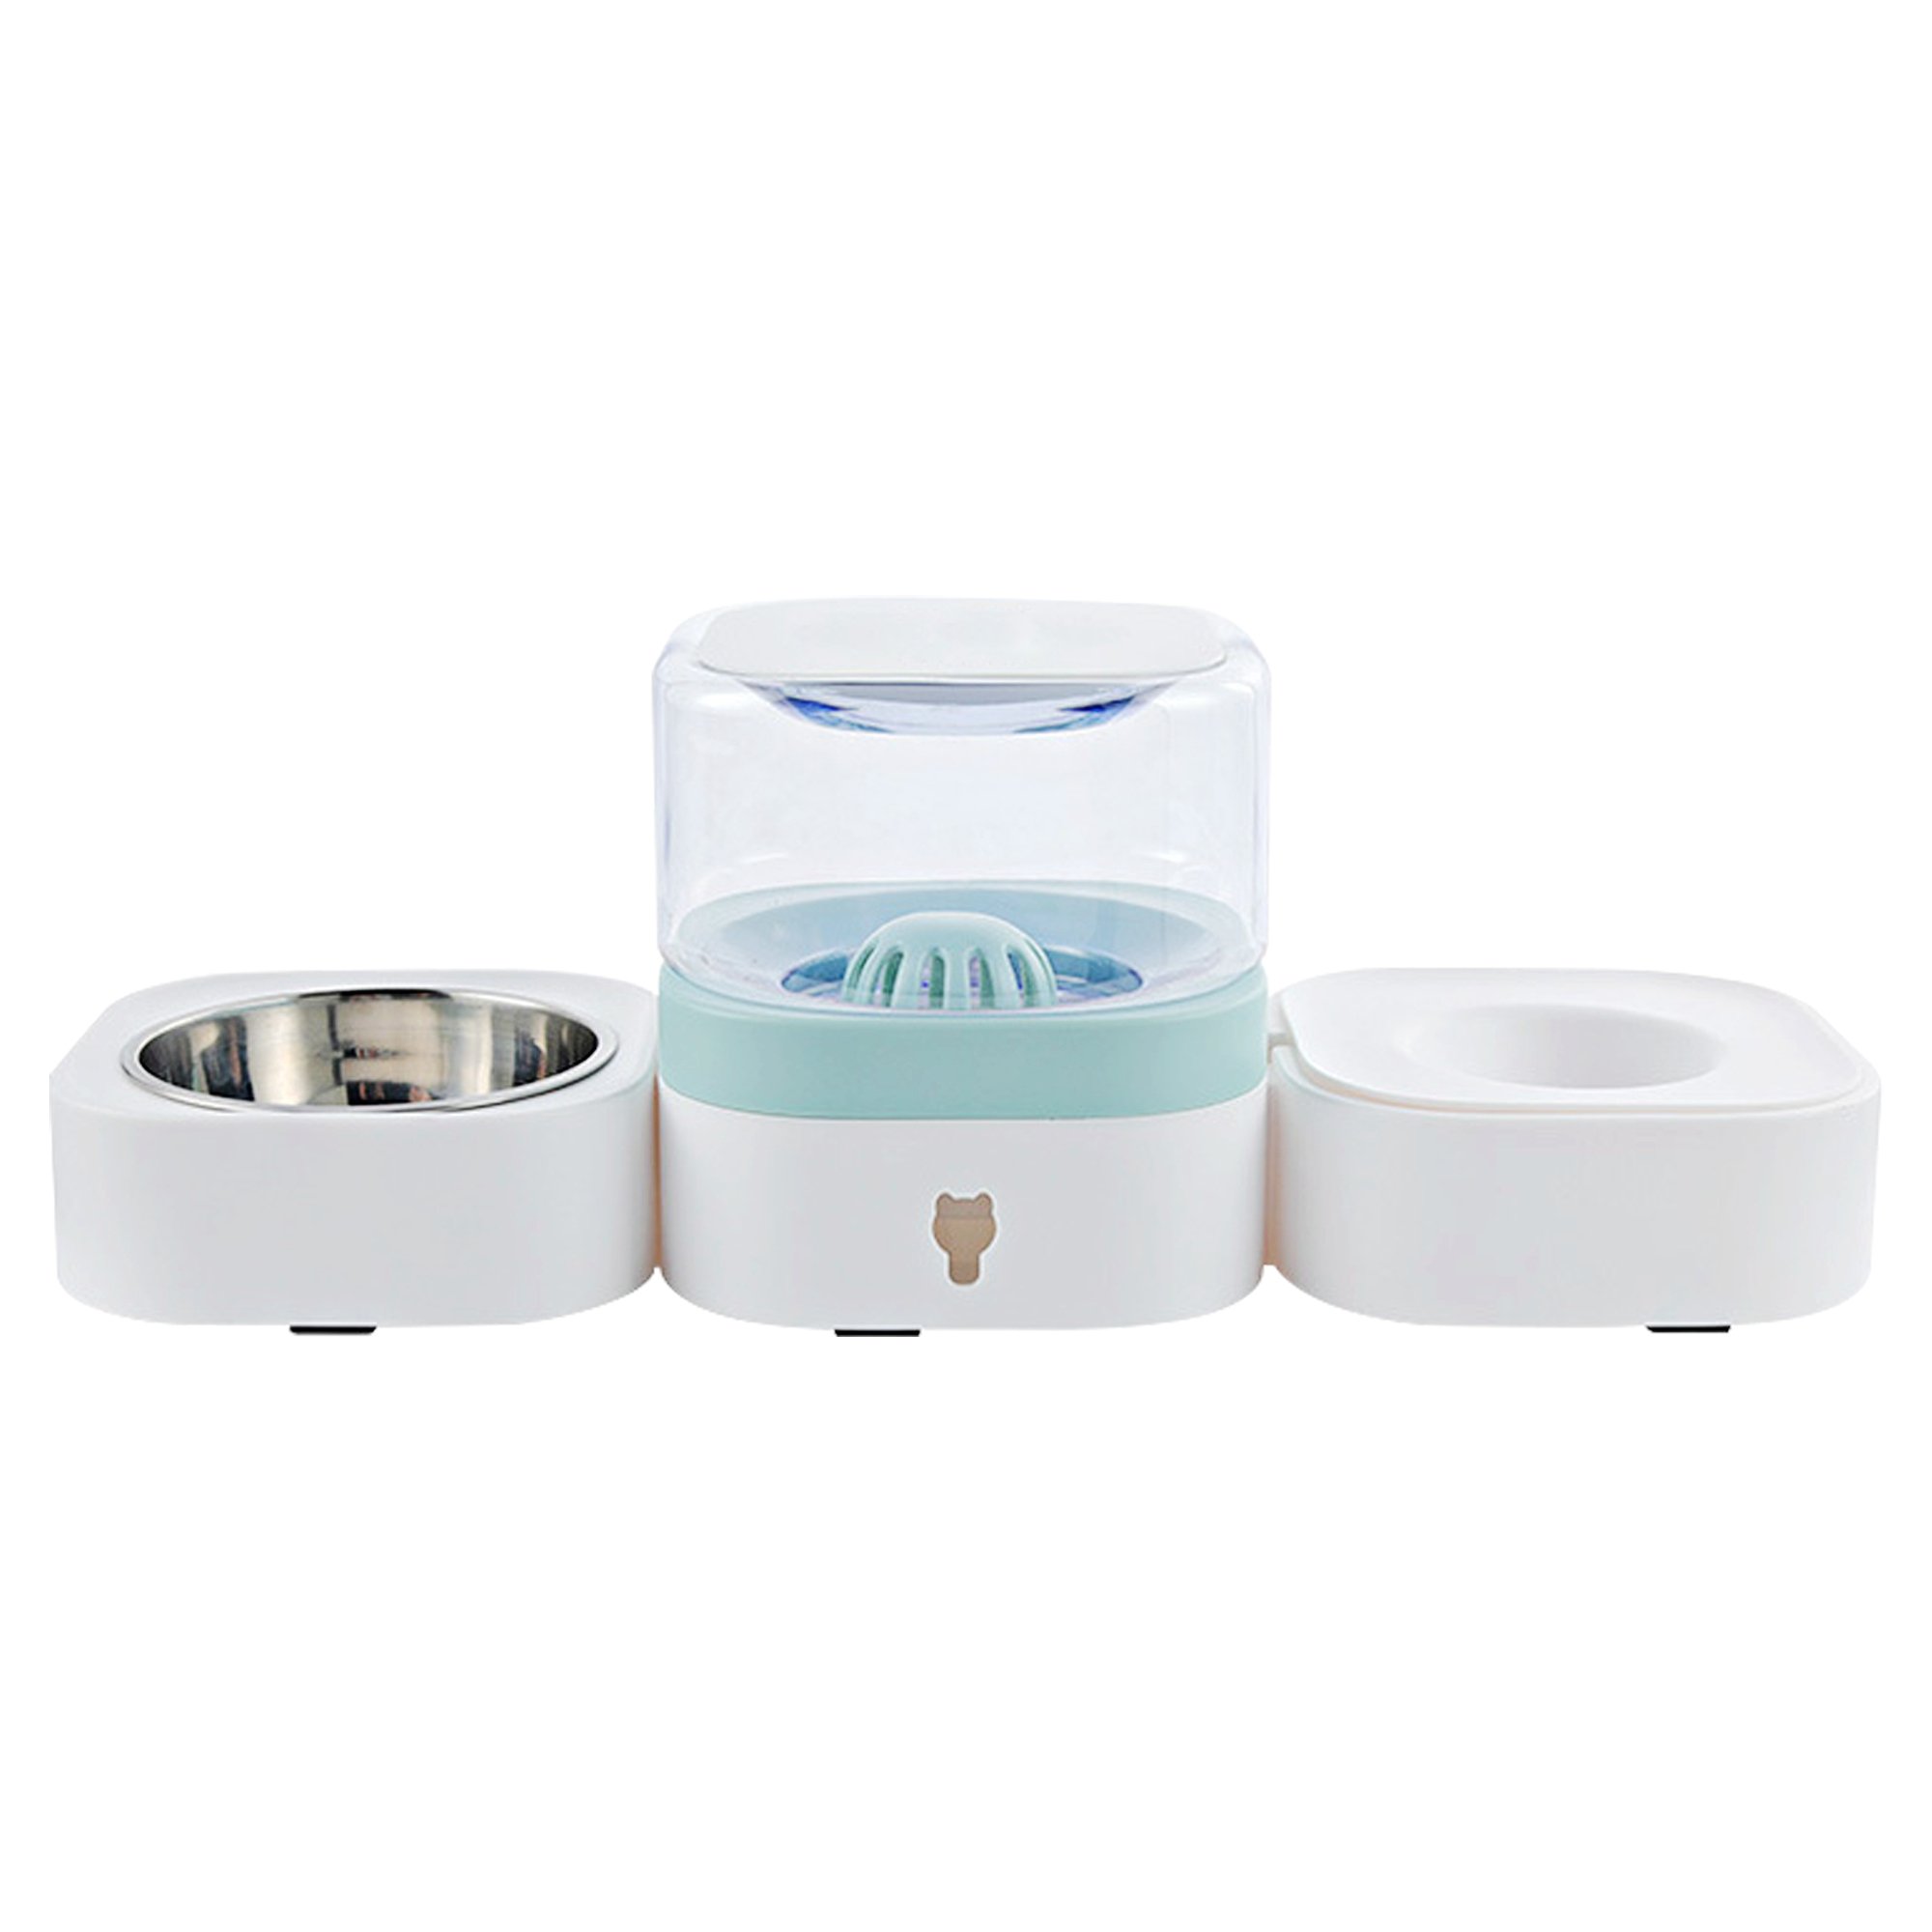 Pet Food Bowl & Automatic Water Feeder